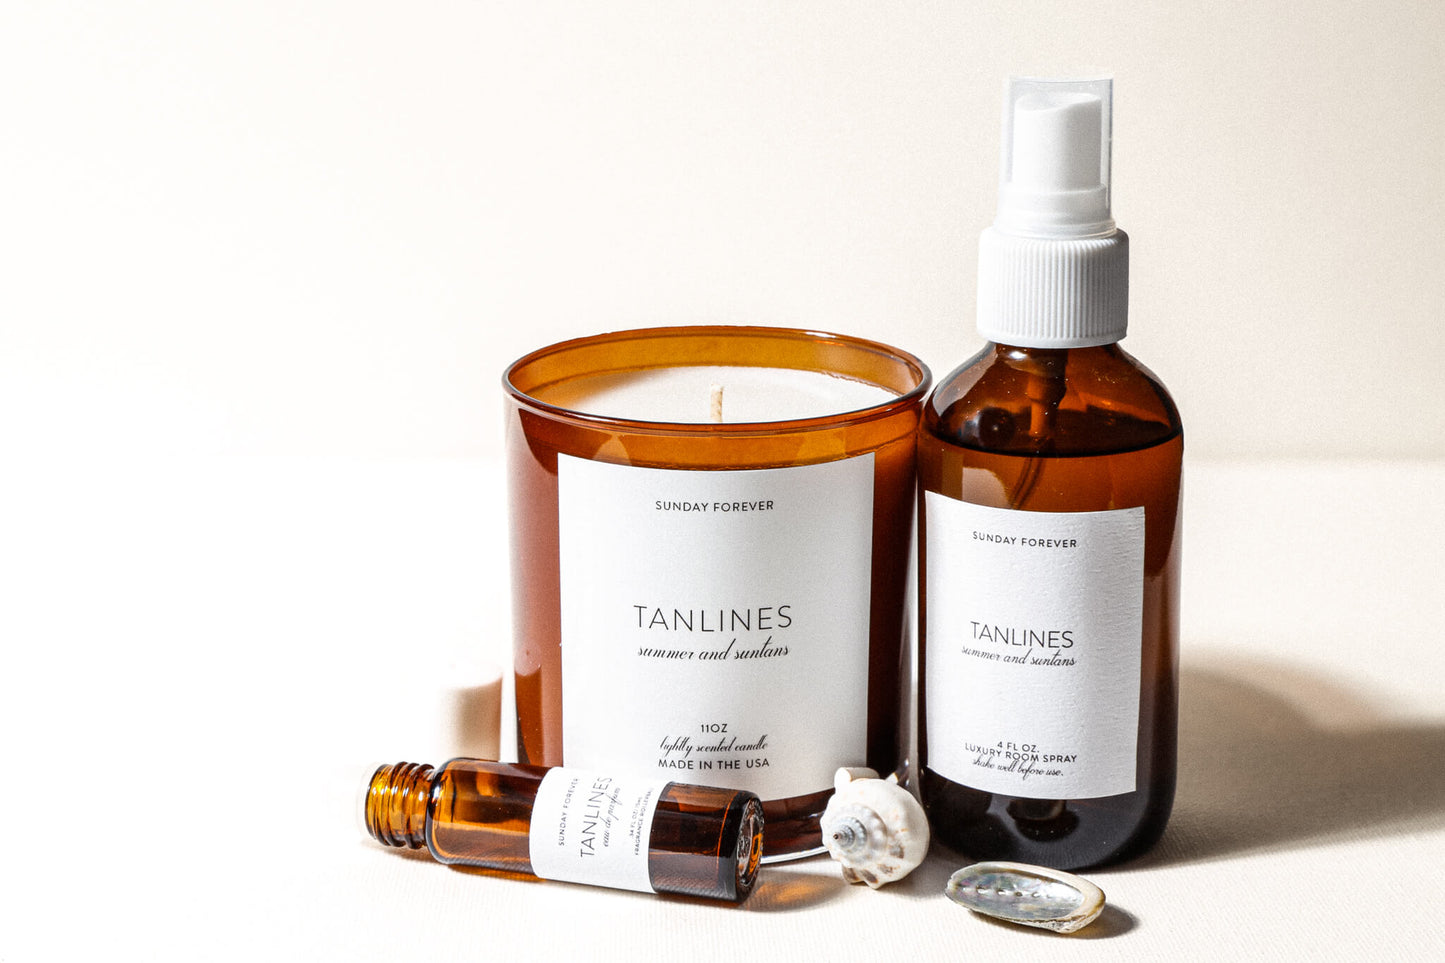 Sunday Forever Only Tans Bundle with Tanlines Candle, Room Mist and New Perfume Rollerball